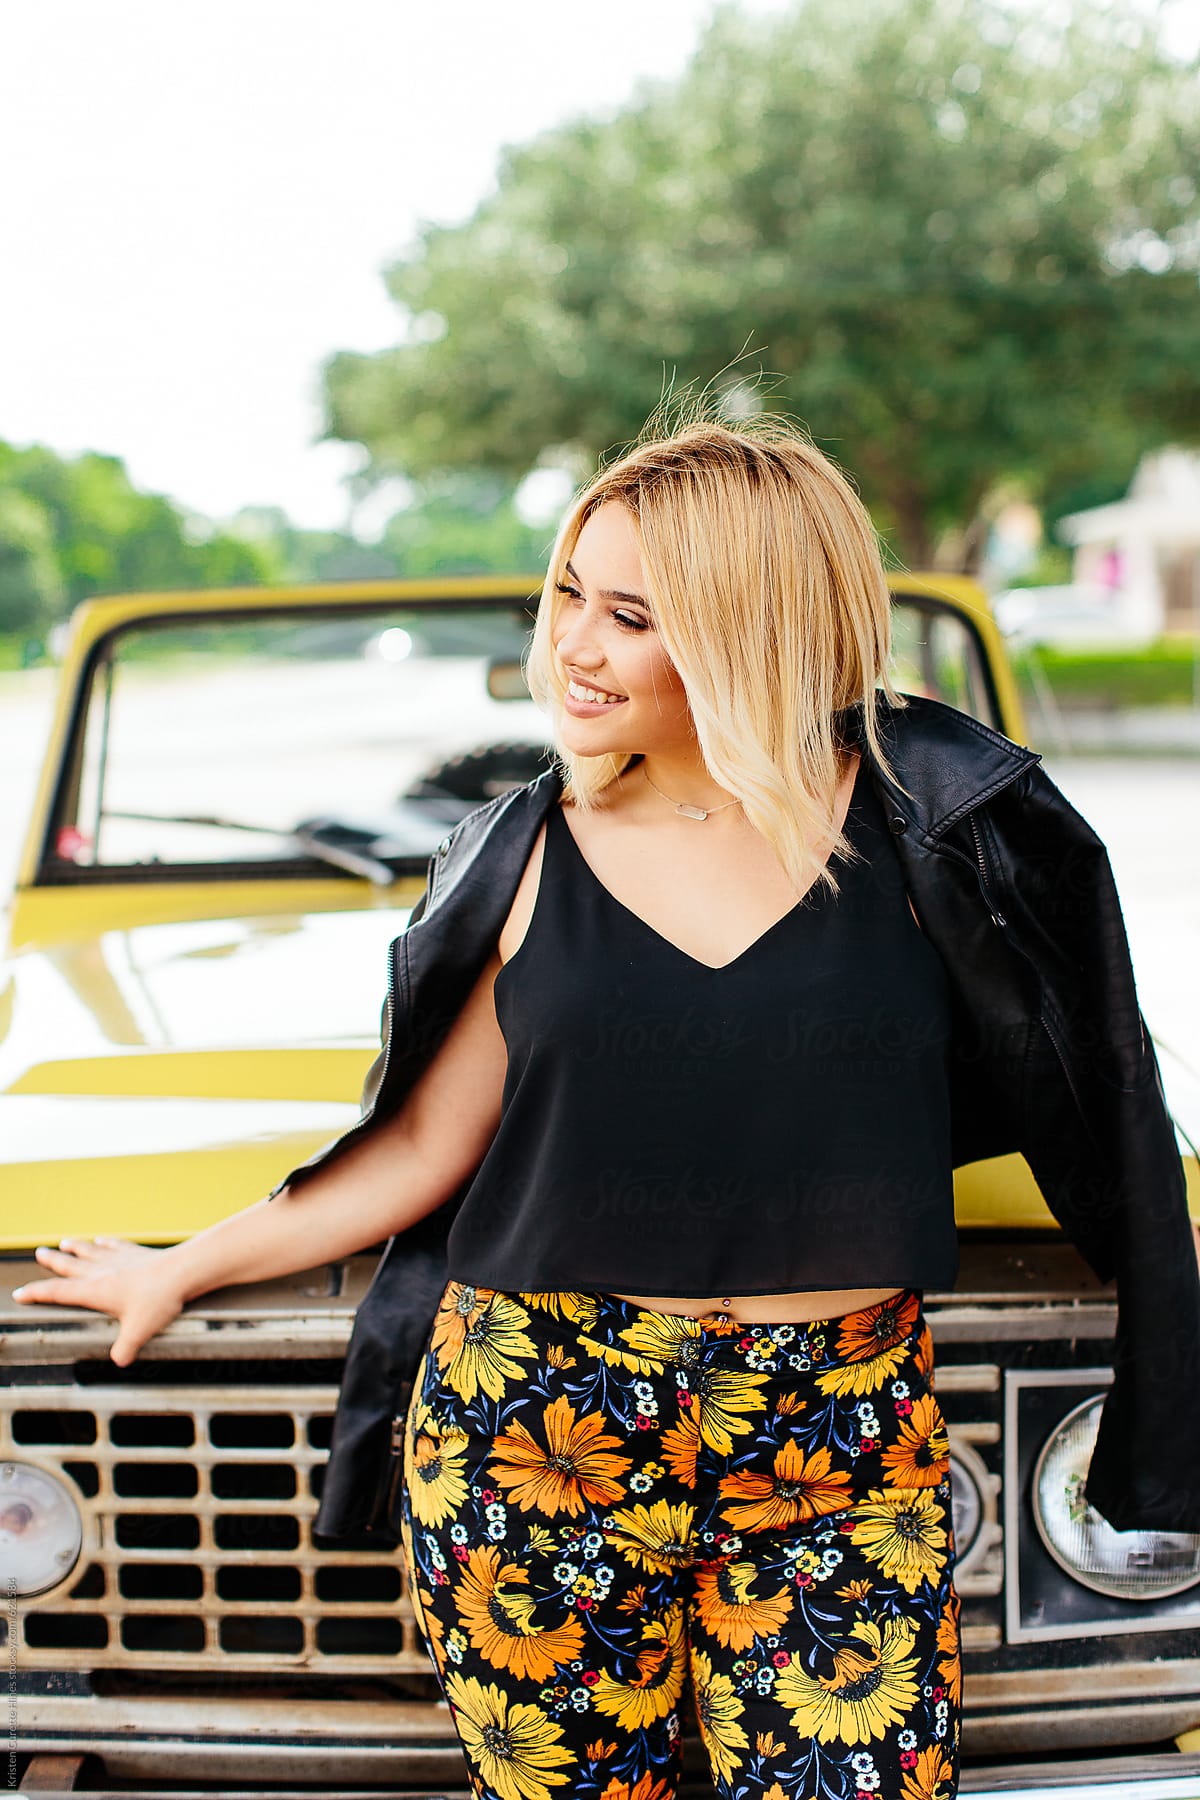 A beautiful woman leaning up against a yellow car.